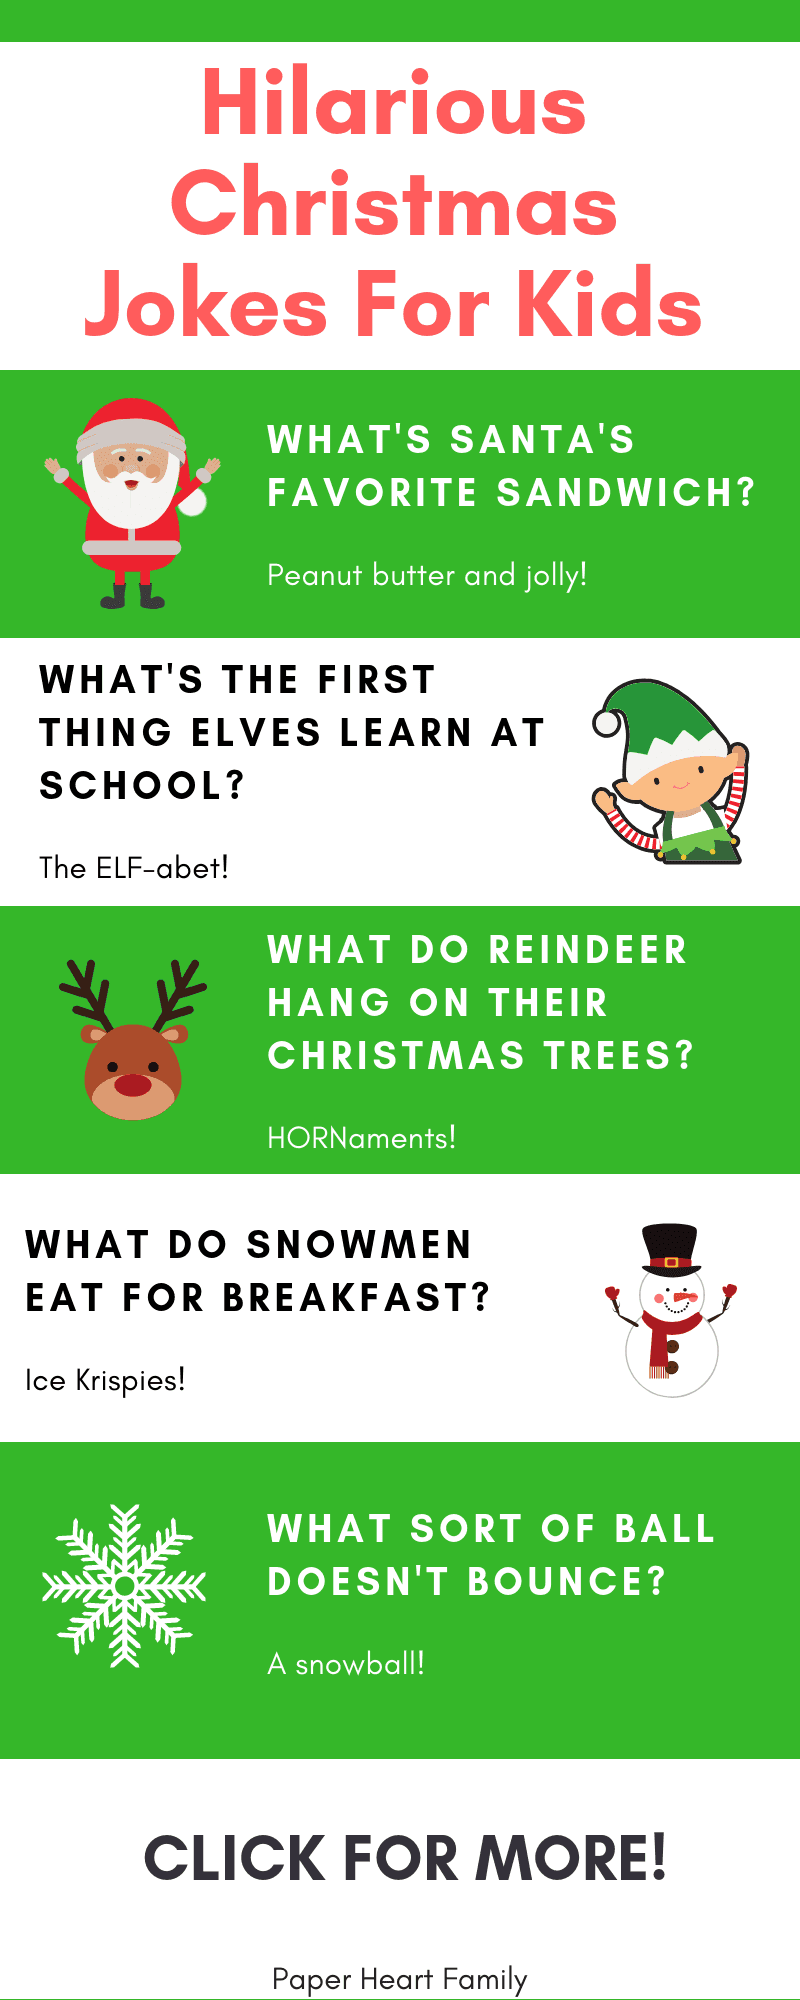 Start a new holiday tradition by sharing these Christmas jokes for kids with your family.